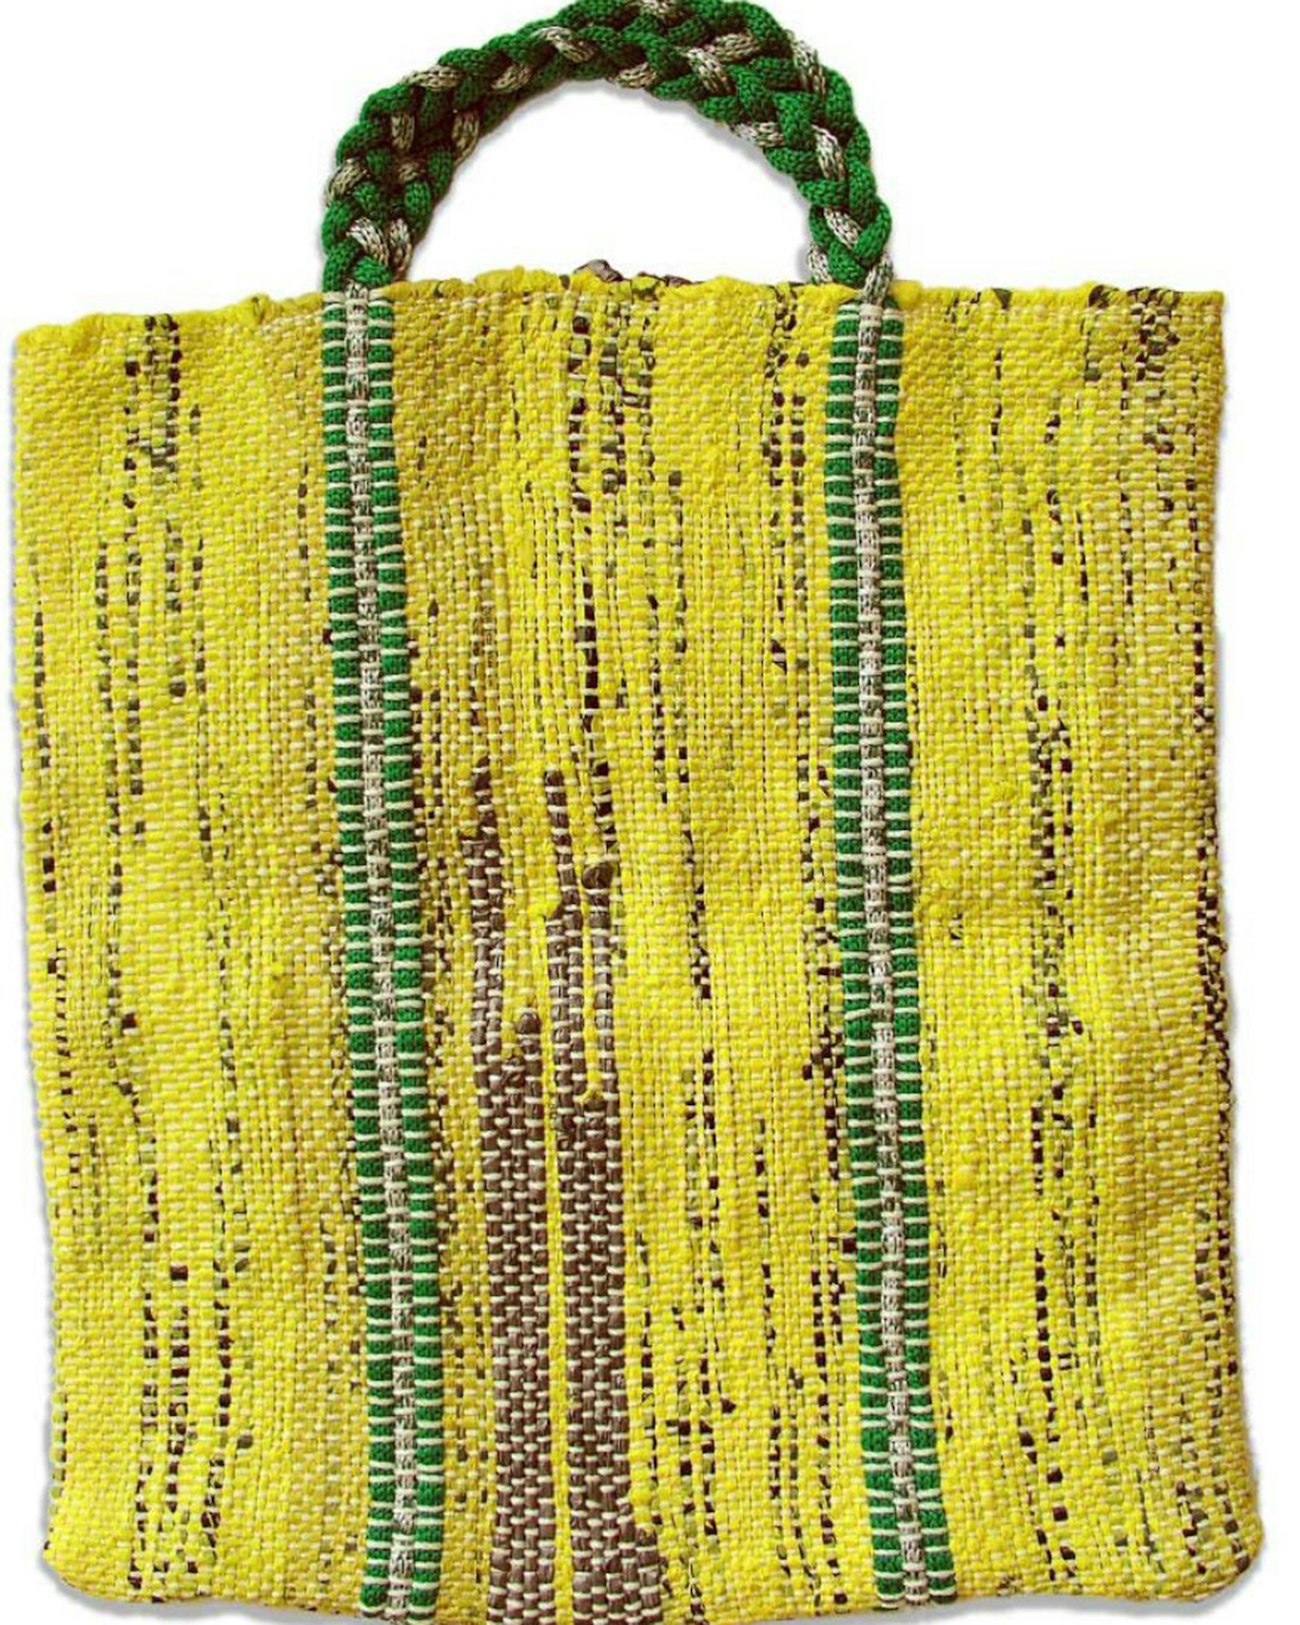 A Sturdy Tote to Weave, Use, and Re-Use! | Handwoven